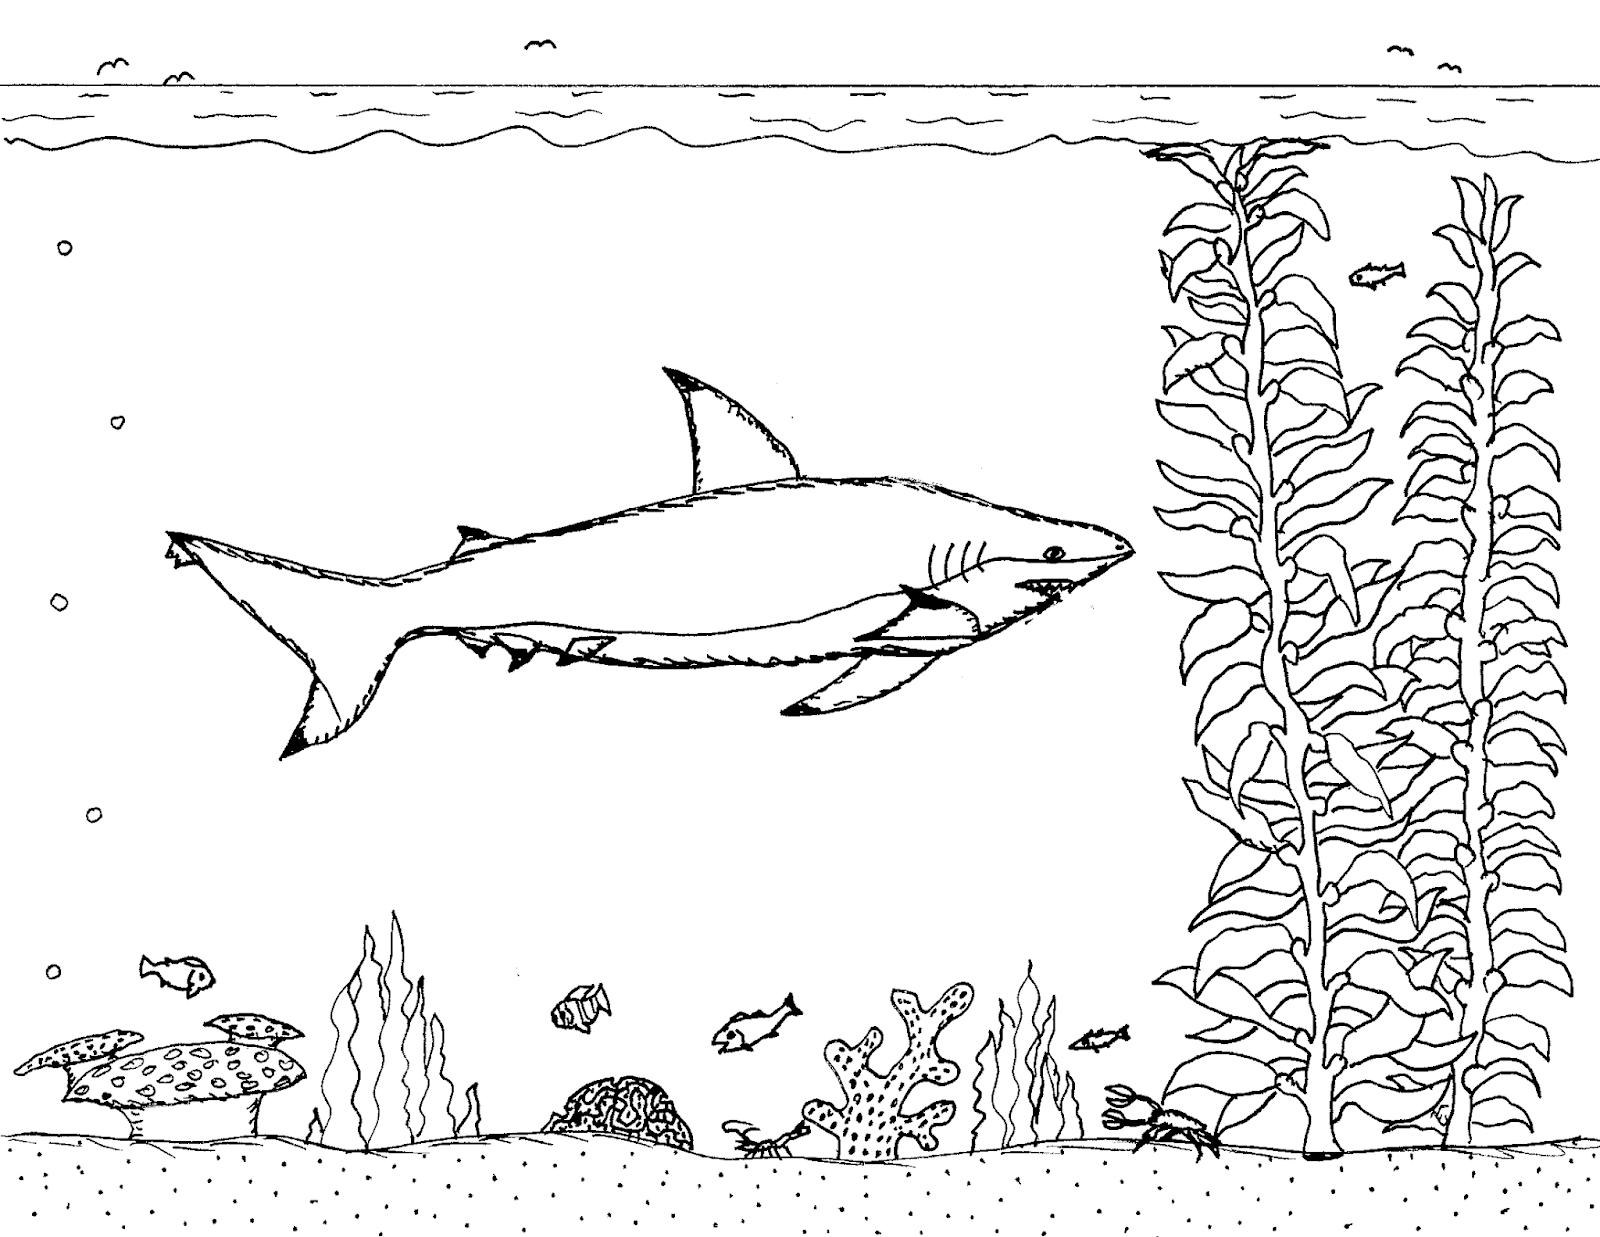 Download Robin's Great Coloring Pages: Blacktip Reef Shark